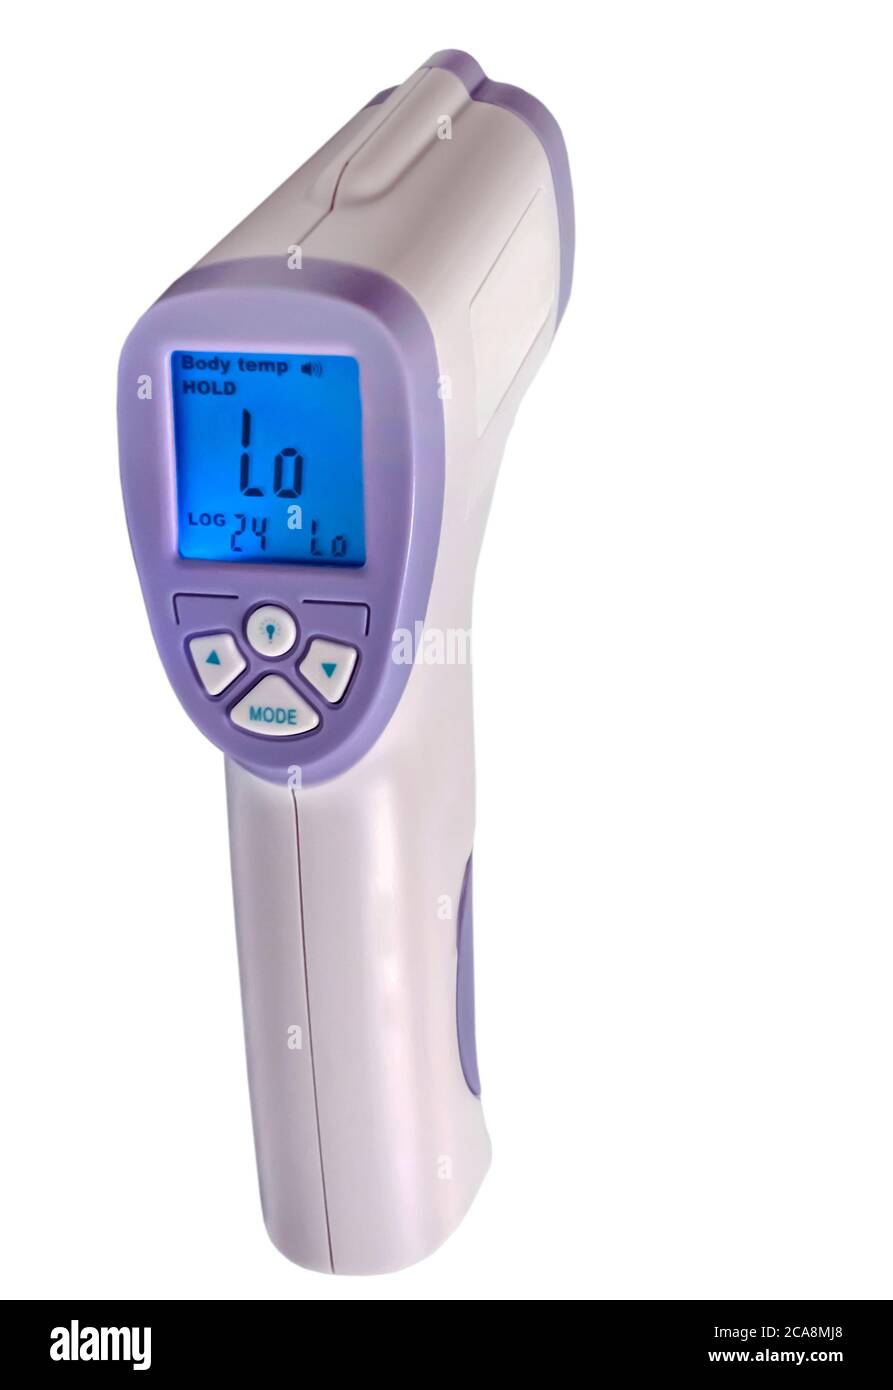 https://c8.alamy.com/comp/2CA8MJ8/thermometer-gun-non-contact-body-or-infrared-digital-temperature-gun-sight-handheld-forehead-readings-temperature-measurement-device-isolated-on-whi-2CA8MJ8.jpg